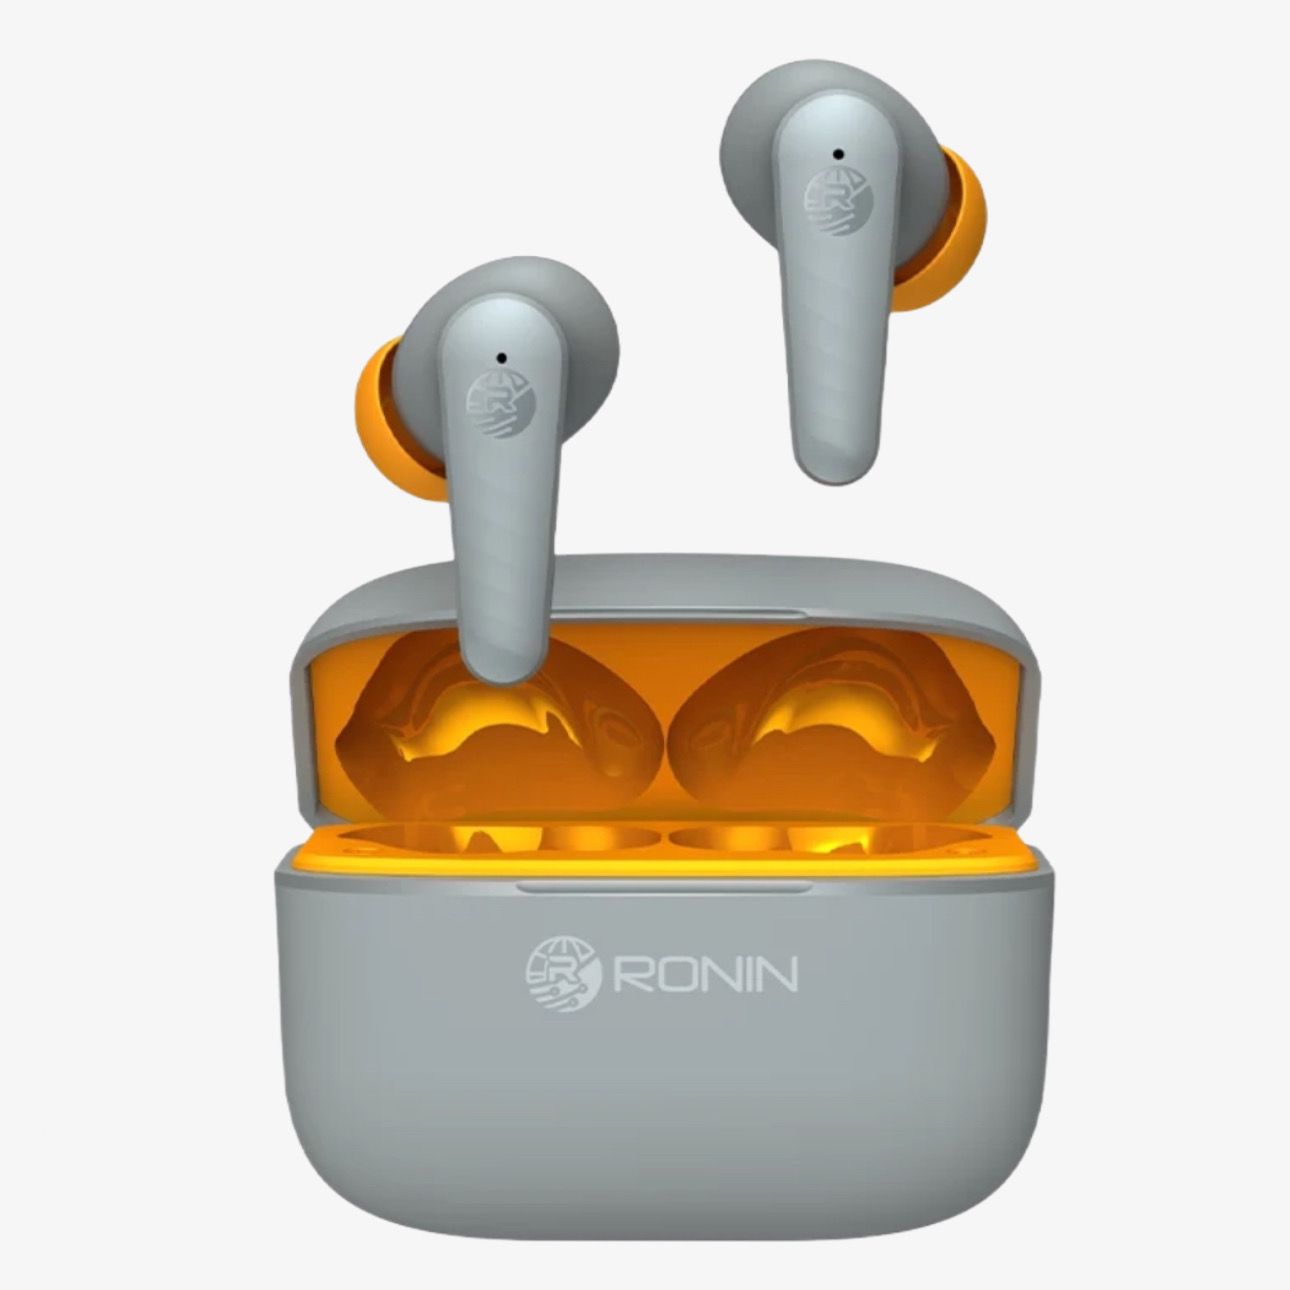 RONIN R840 EARBUDS